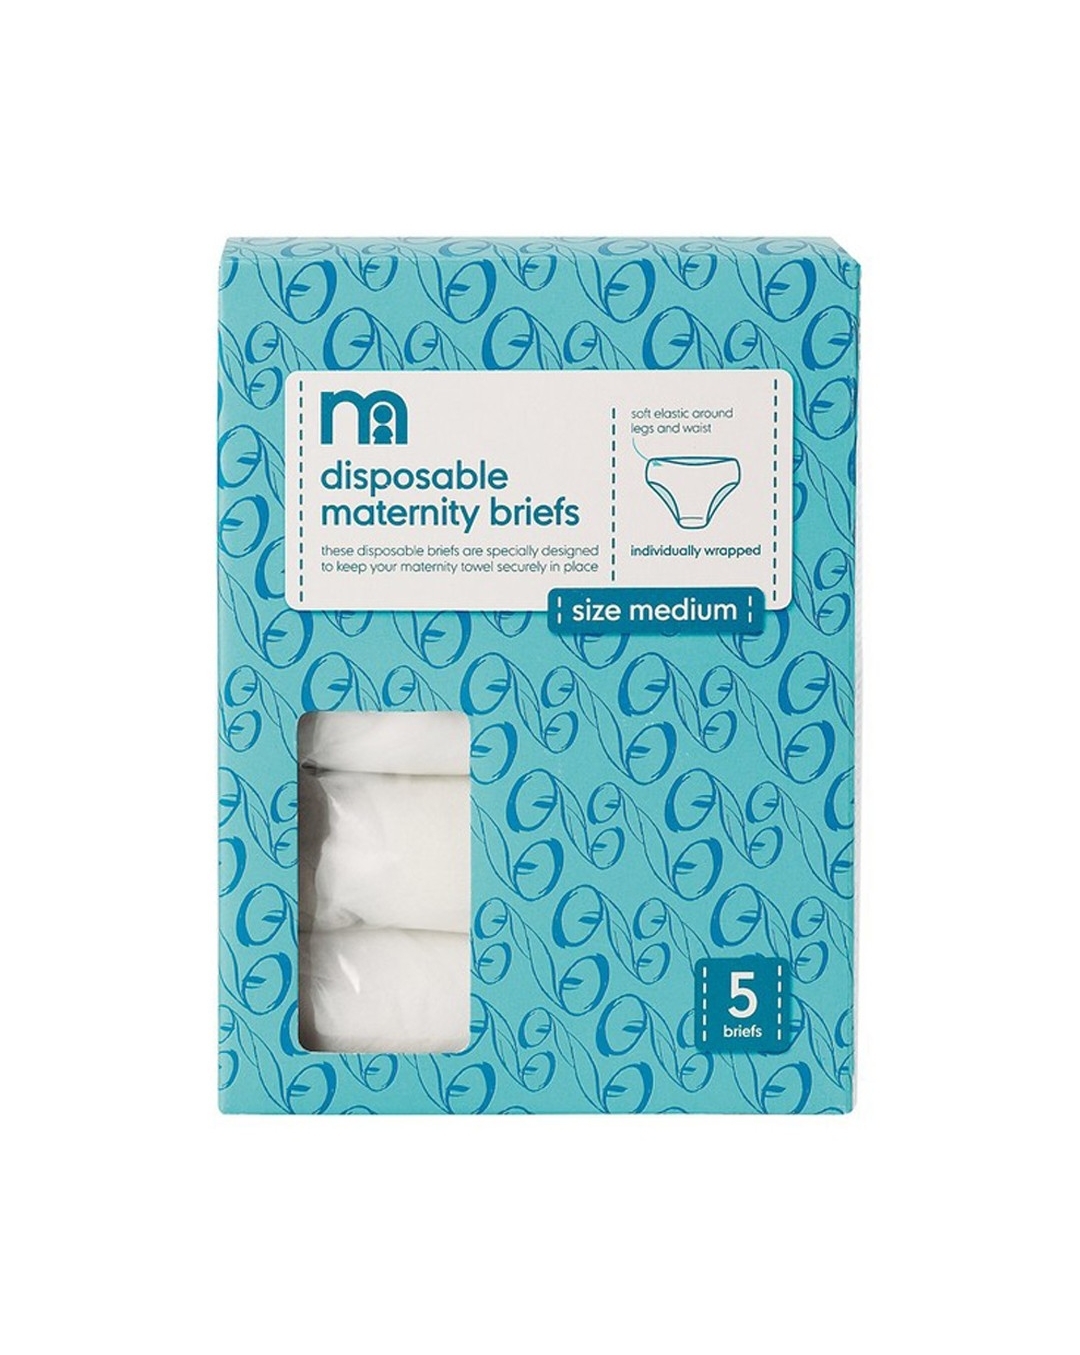 Buy Mothercare Disposable Maternity Briefs Online at Best Price